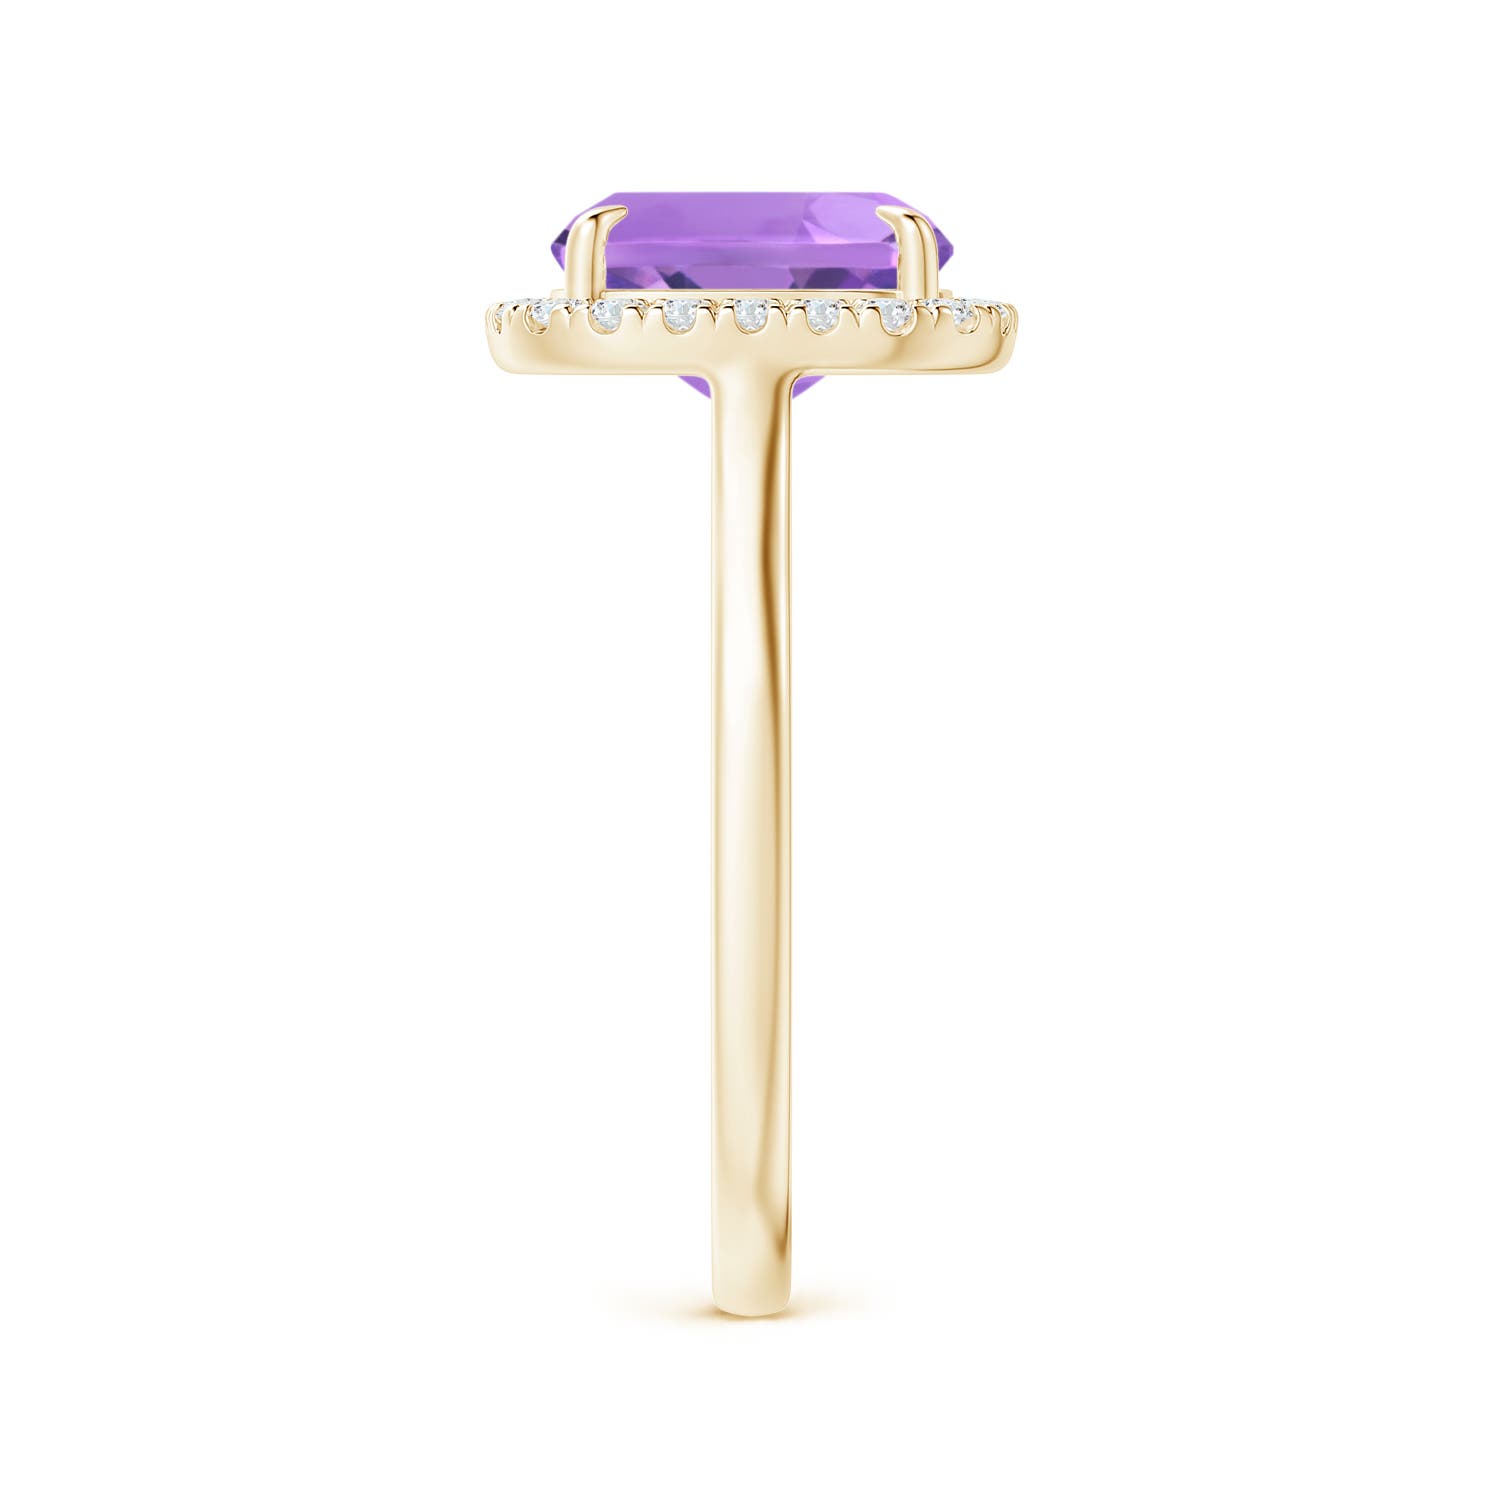 A - Amethyst / 2.22 CT / 14 KT Yellow Gold